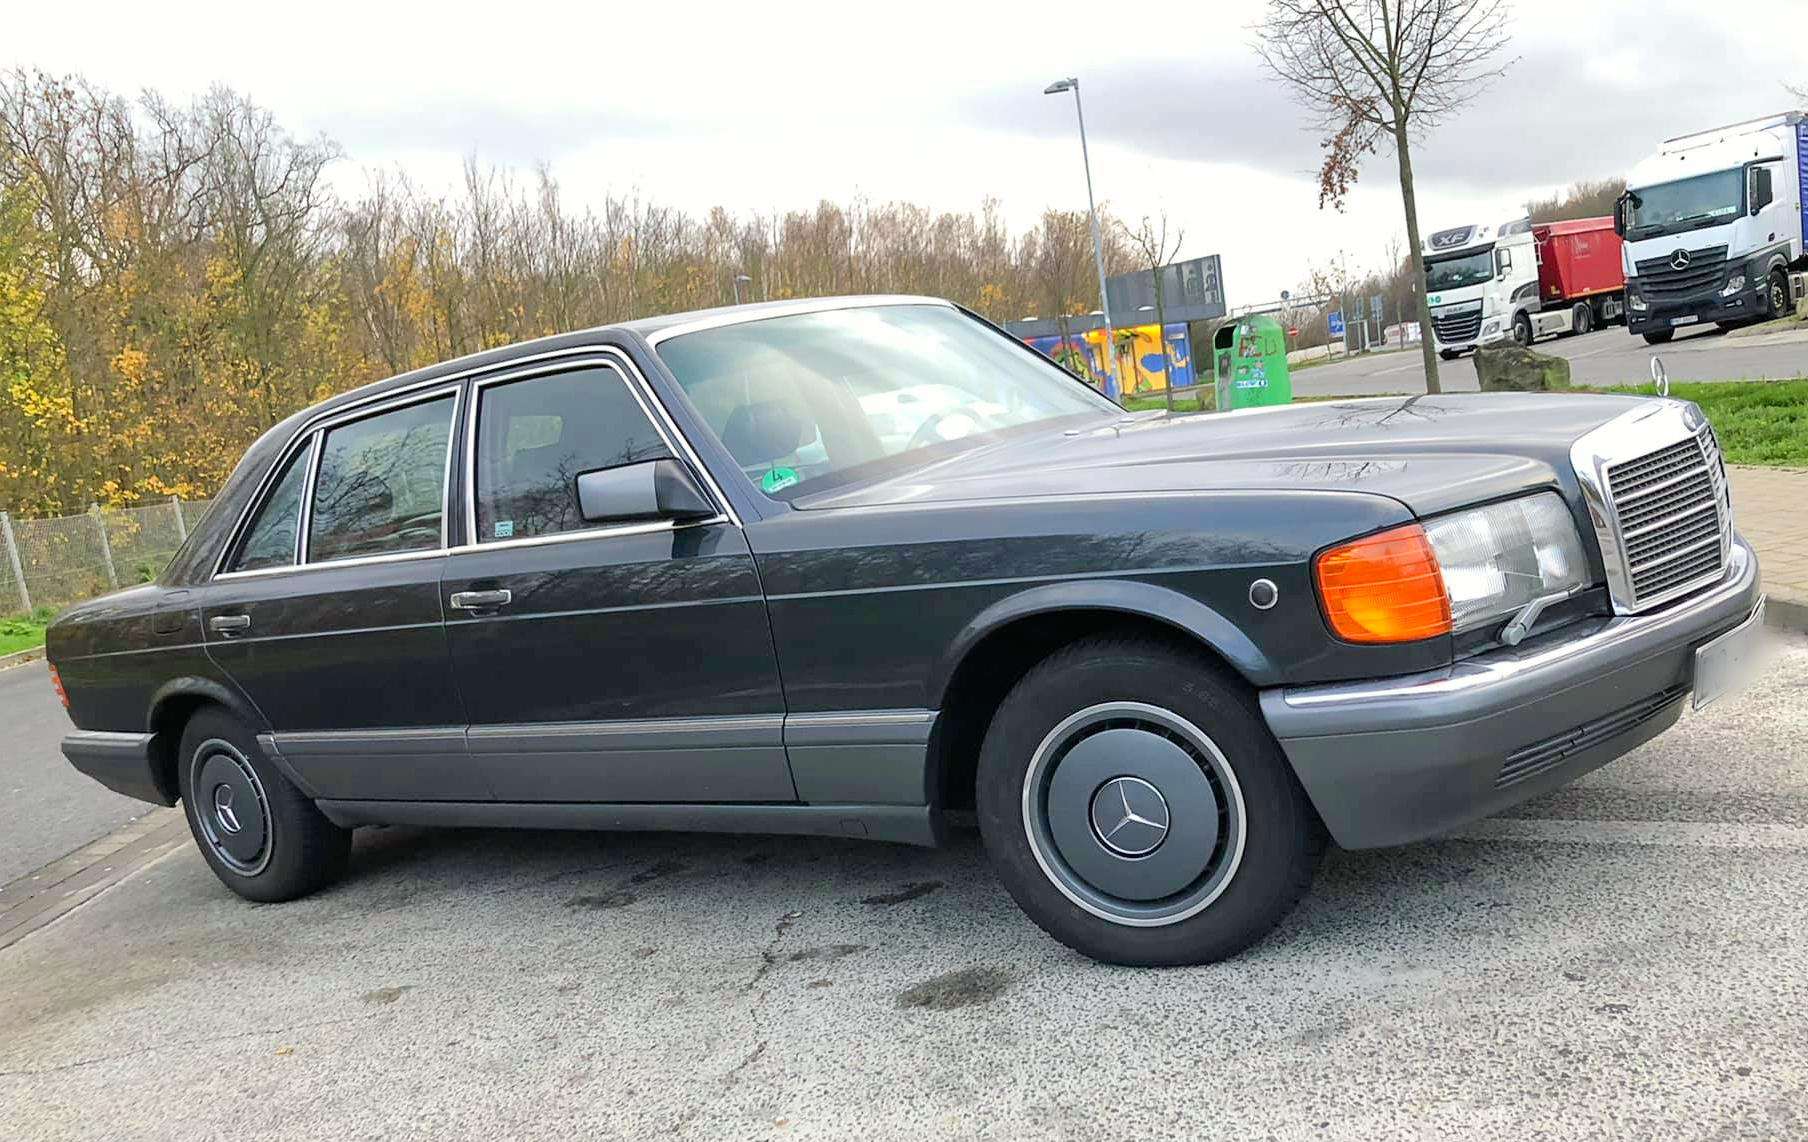 1990, mercedes, 500SEL, w126, 126, s-class, 15", 15-inch, hubcaps, wheel covers, 15 inch